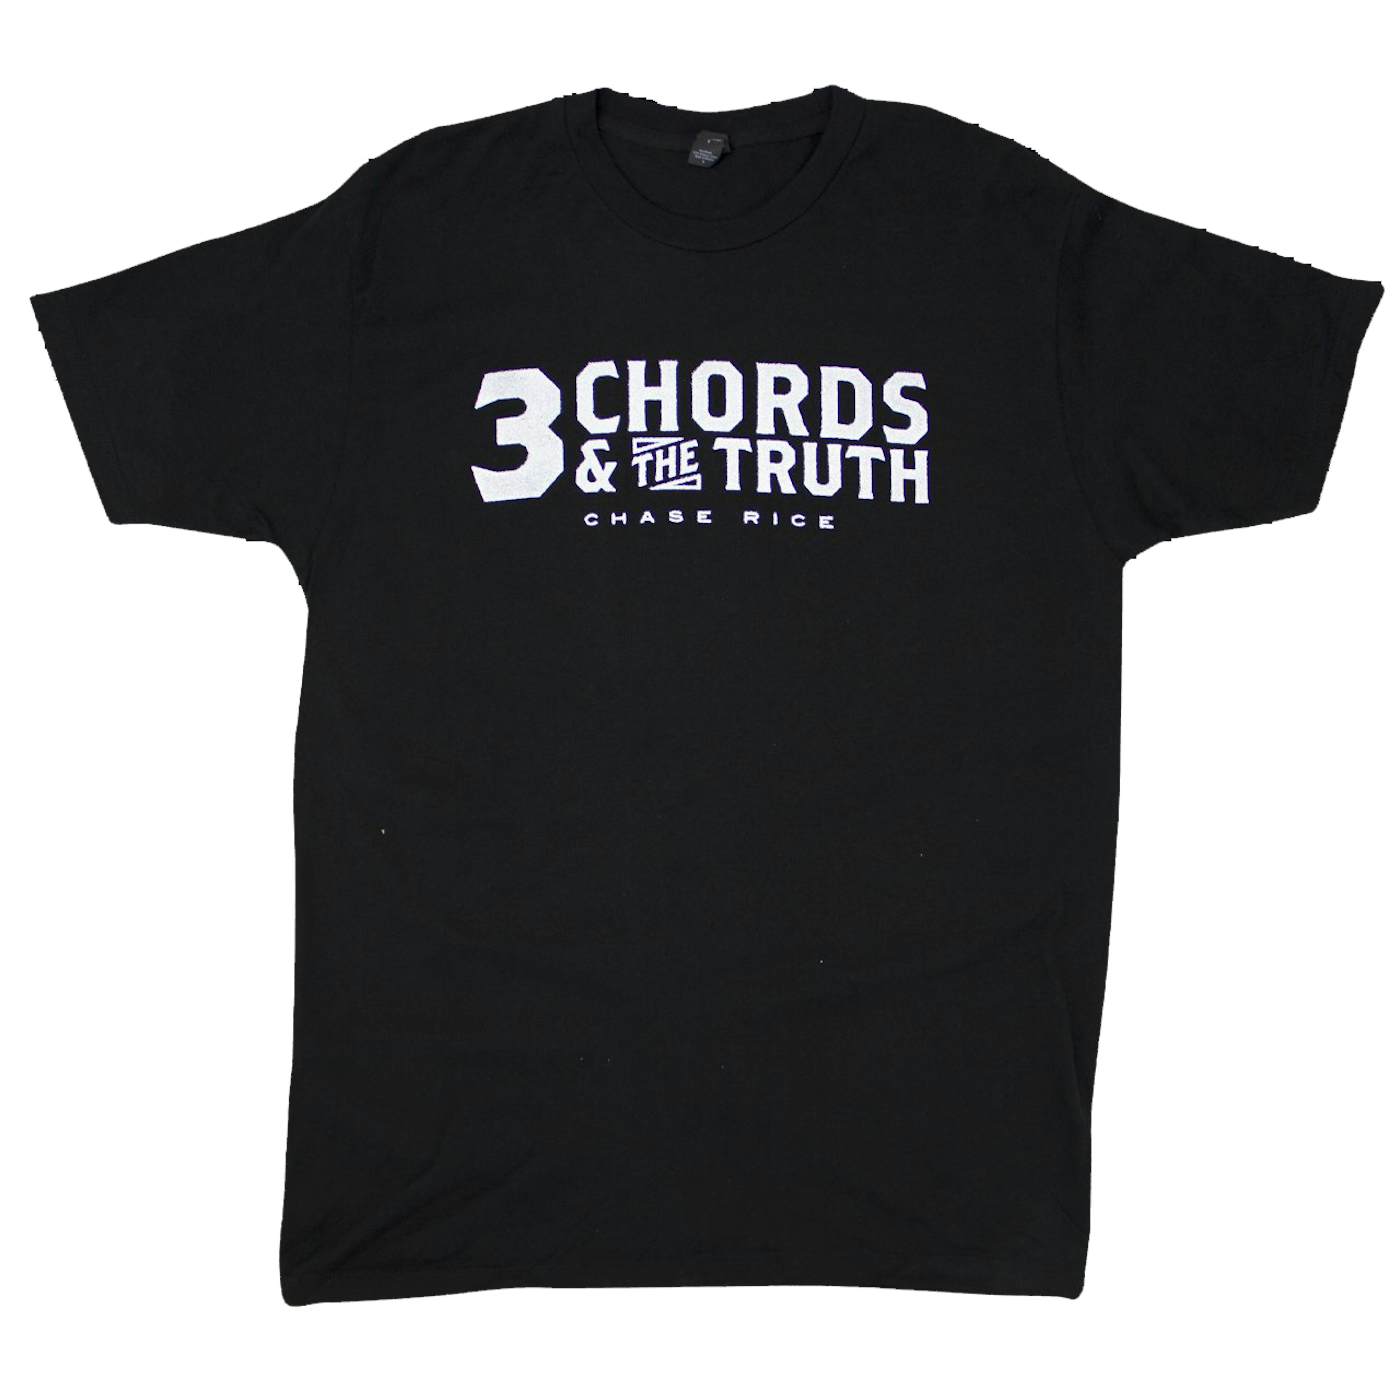 Chase Rice 3 Chords & The Truth Tee